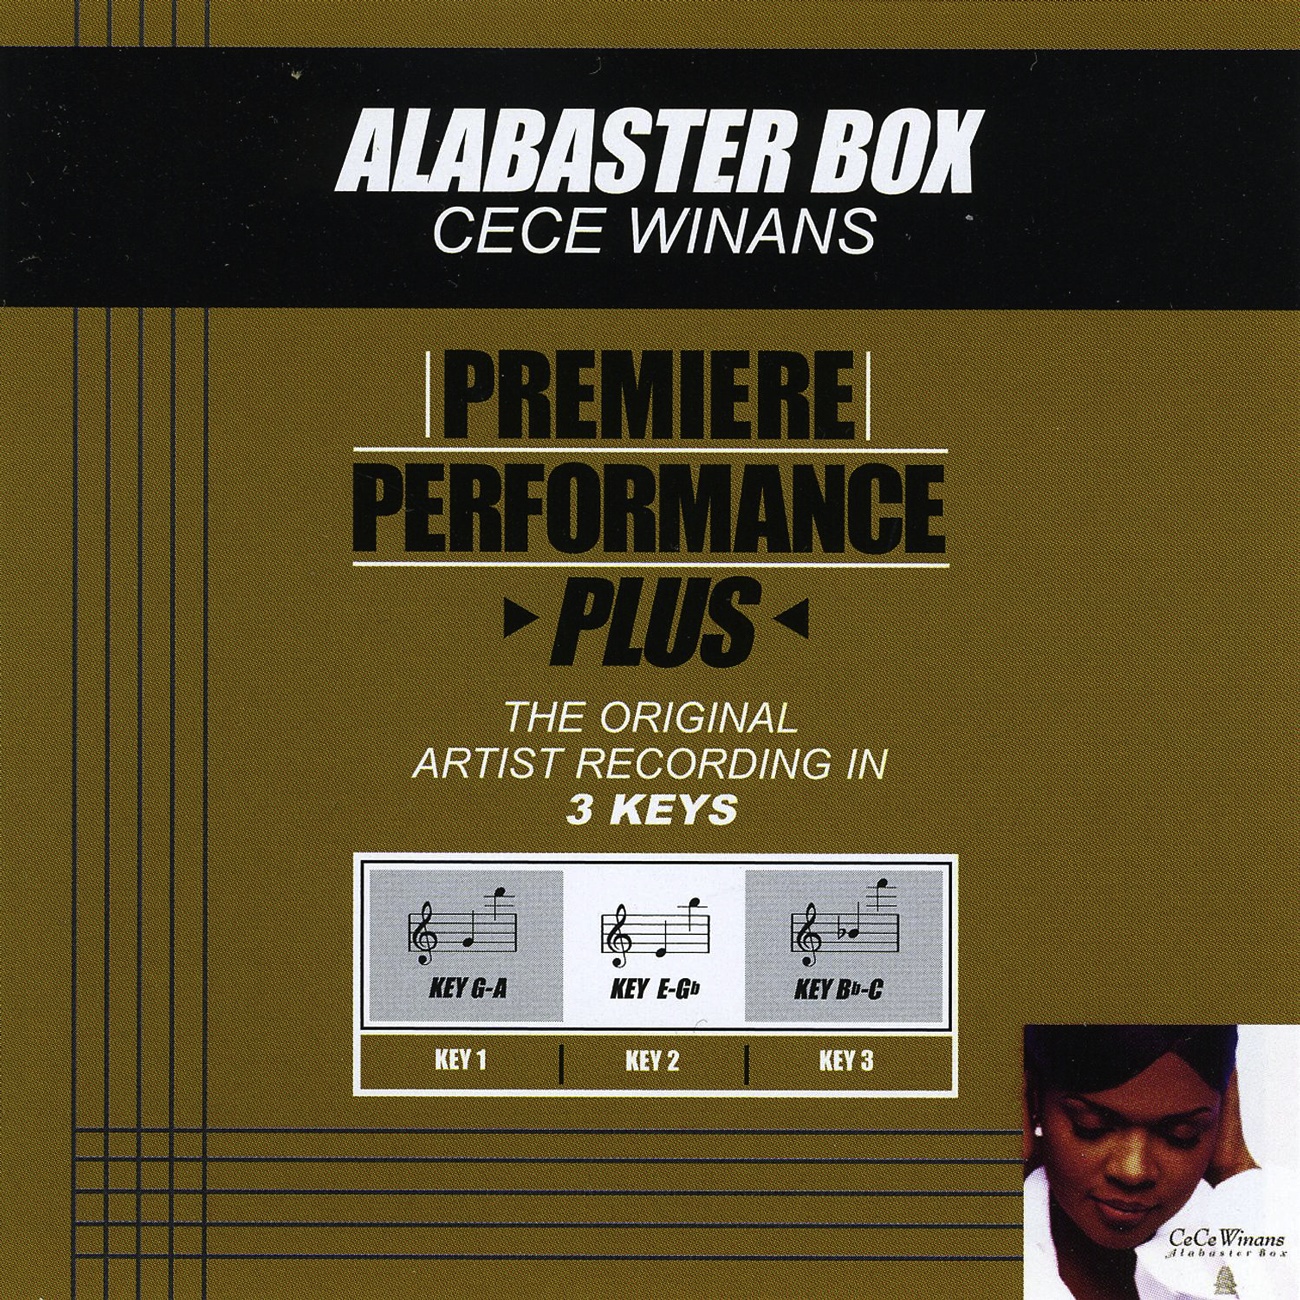 Alabaster Box (Performance Track In Key Of Bb-C)